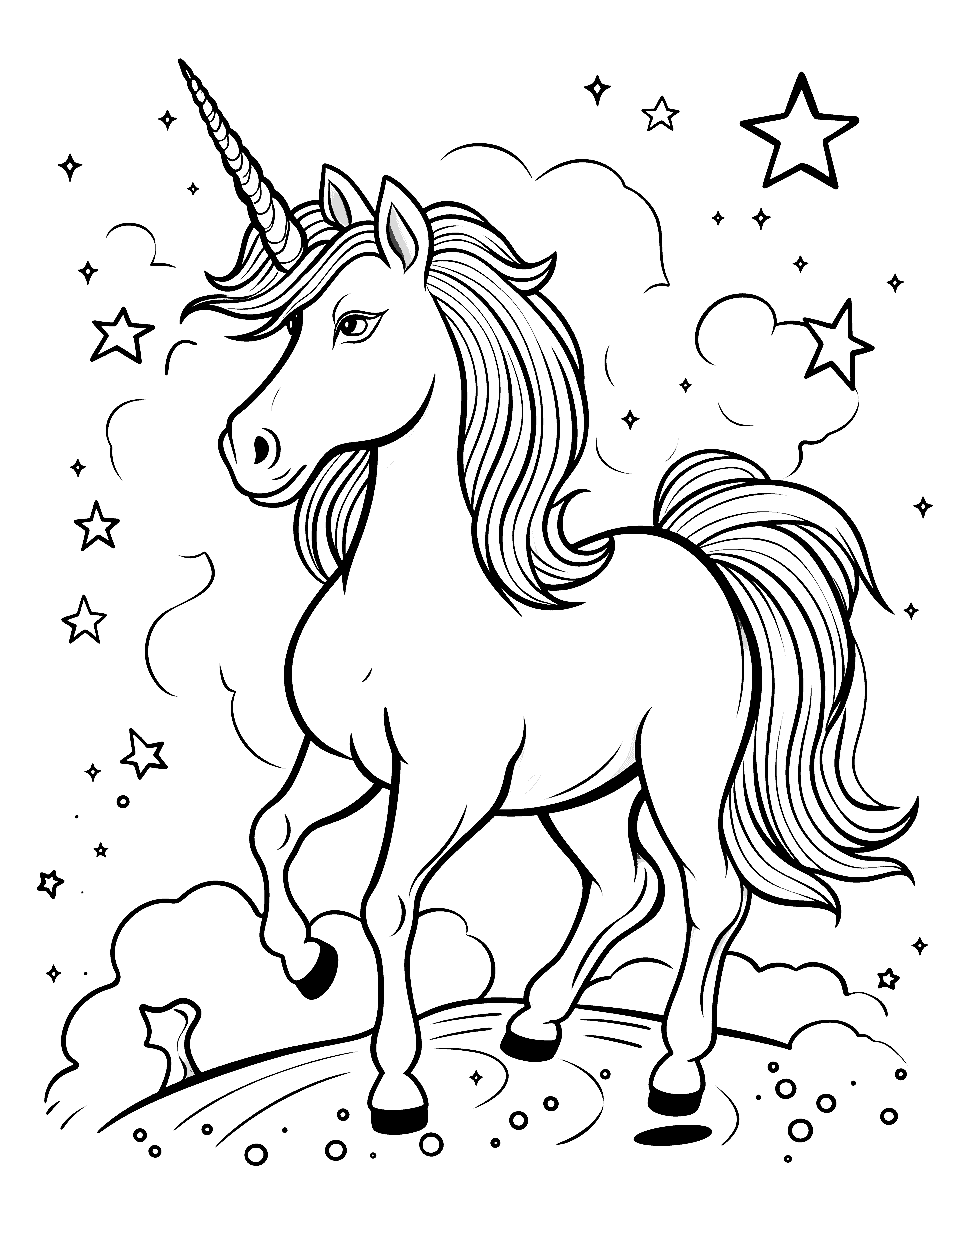 Unicorn and Outer Space Coloring Page - A unicorn astronaut walking on a planet surrounded by stars.